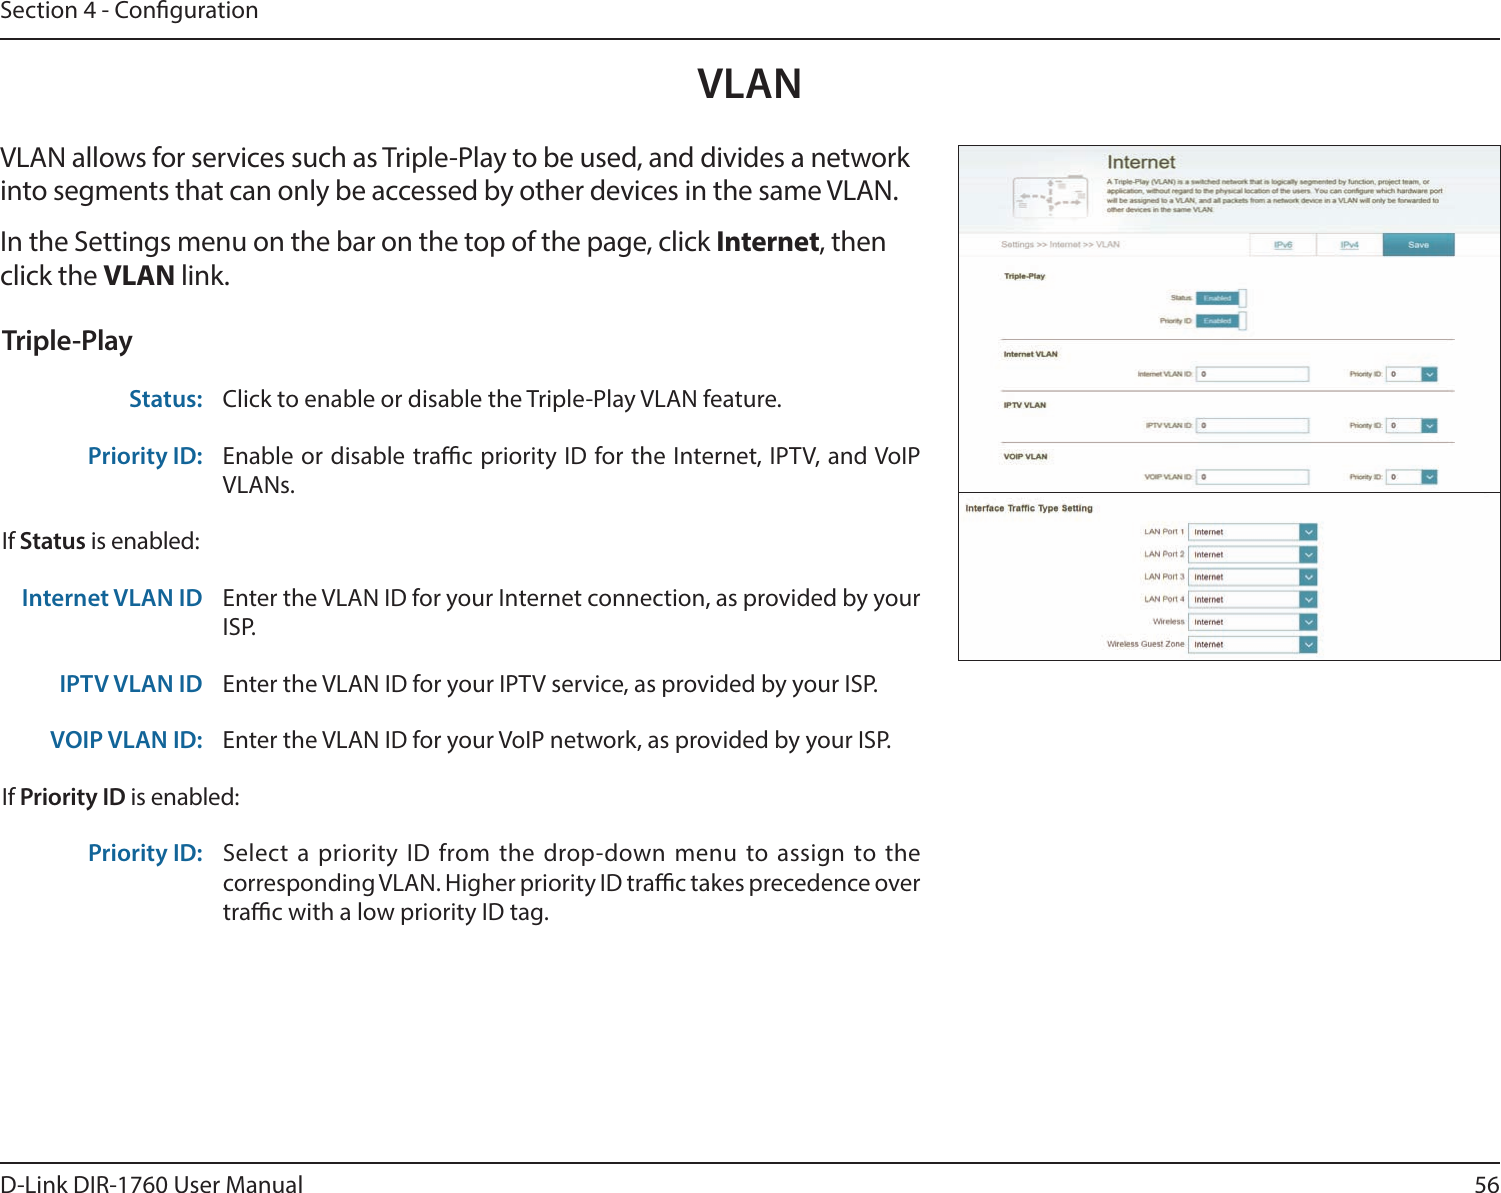 56D-Link DIR-1760 User ManualSection 4 - CongurationVLANVLAN allows for services such as Triple-Play to be used, and divides a network into segments that can only be accessed by other devices in the same VLAN.In the Settings menu on the bar on the top of the page, click Internet, then click the VLAN link. Triple-PlayStatus: Click to enable or disable the Triple-Play VLAN feature. Priority ID: Enable or disable trac priority ID for the Internet, IPTV, and VoIP VLANs. If Status is enabled:Internet VLAN ID Enter the VLAN ID for your Internet connection, as provided by your ISP.IPTV VLAN ID Enter the VLAN ID for your IPTV service, as provided by your ISP. VOIP VLAN ID: Enter the VLAN ID for your VoIP network, as provided by your ISP. If Priority ID is enabled:Priority ID: Select a priority ID from the drop-down menu to assign to the corresponding VLAN. Higher priority ID trac takes precedence over trac with a low priority ID tag.